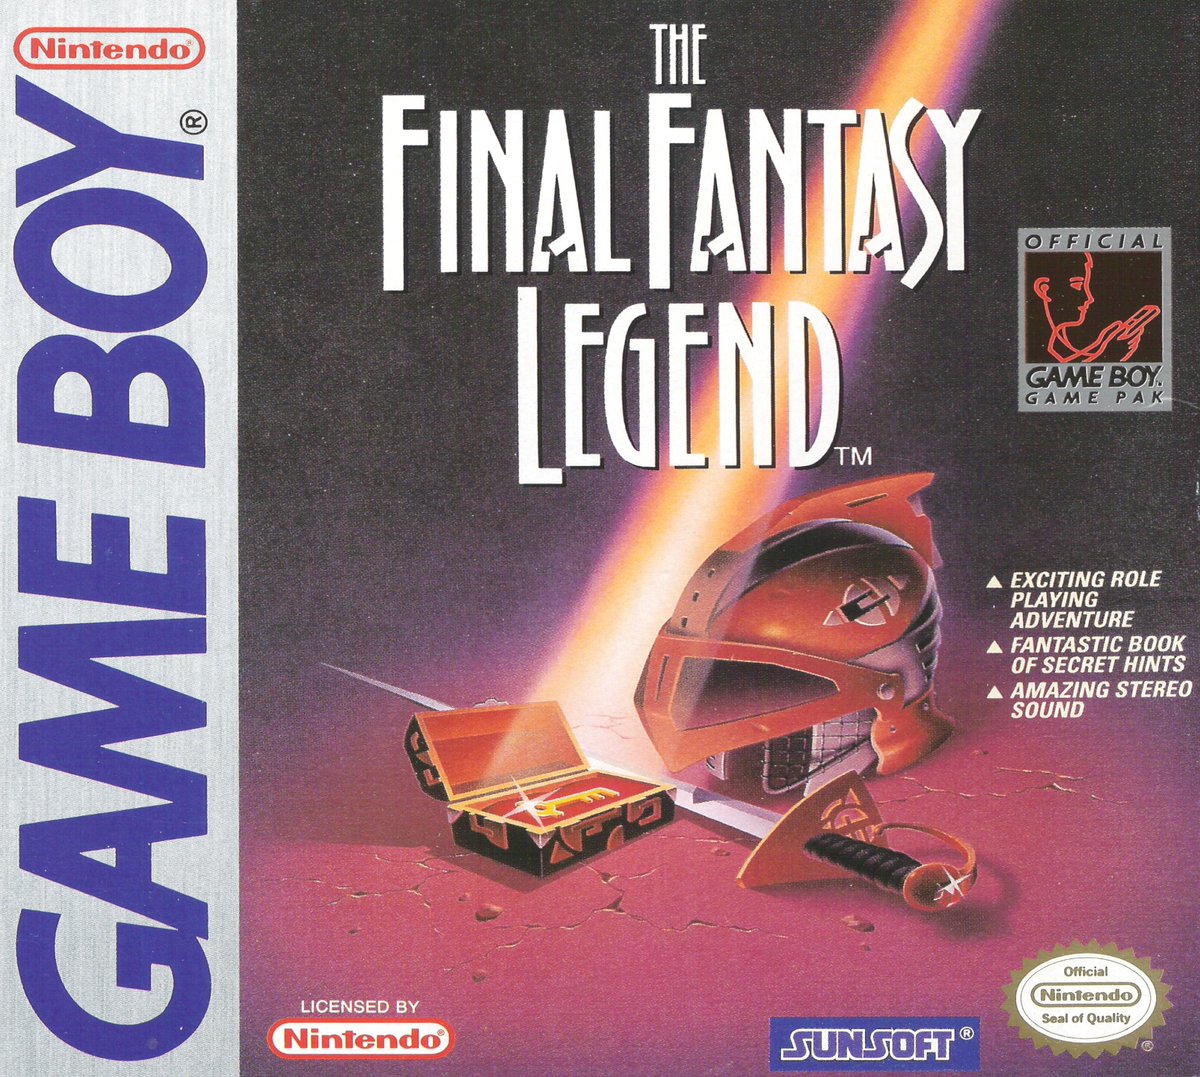 Time for more!This will be a bit long.This time, I'm covering the first game in the Sa Ga series, aka Final Fantasy Legend!First, a quick run-down on what this game actually is.It was release din Japan as SaGa, the first in a new franchise that had no connection to-